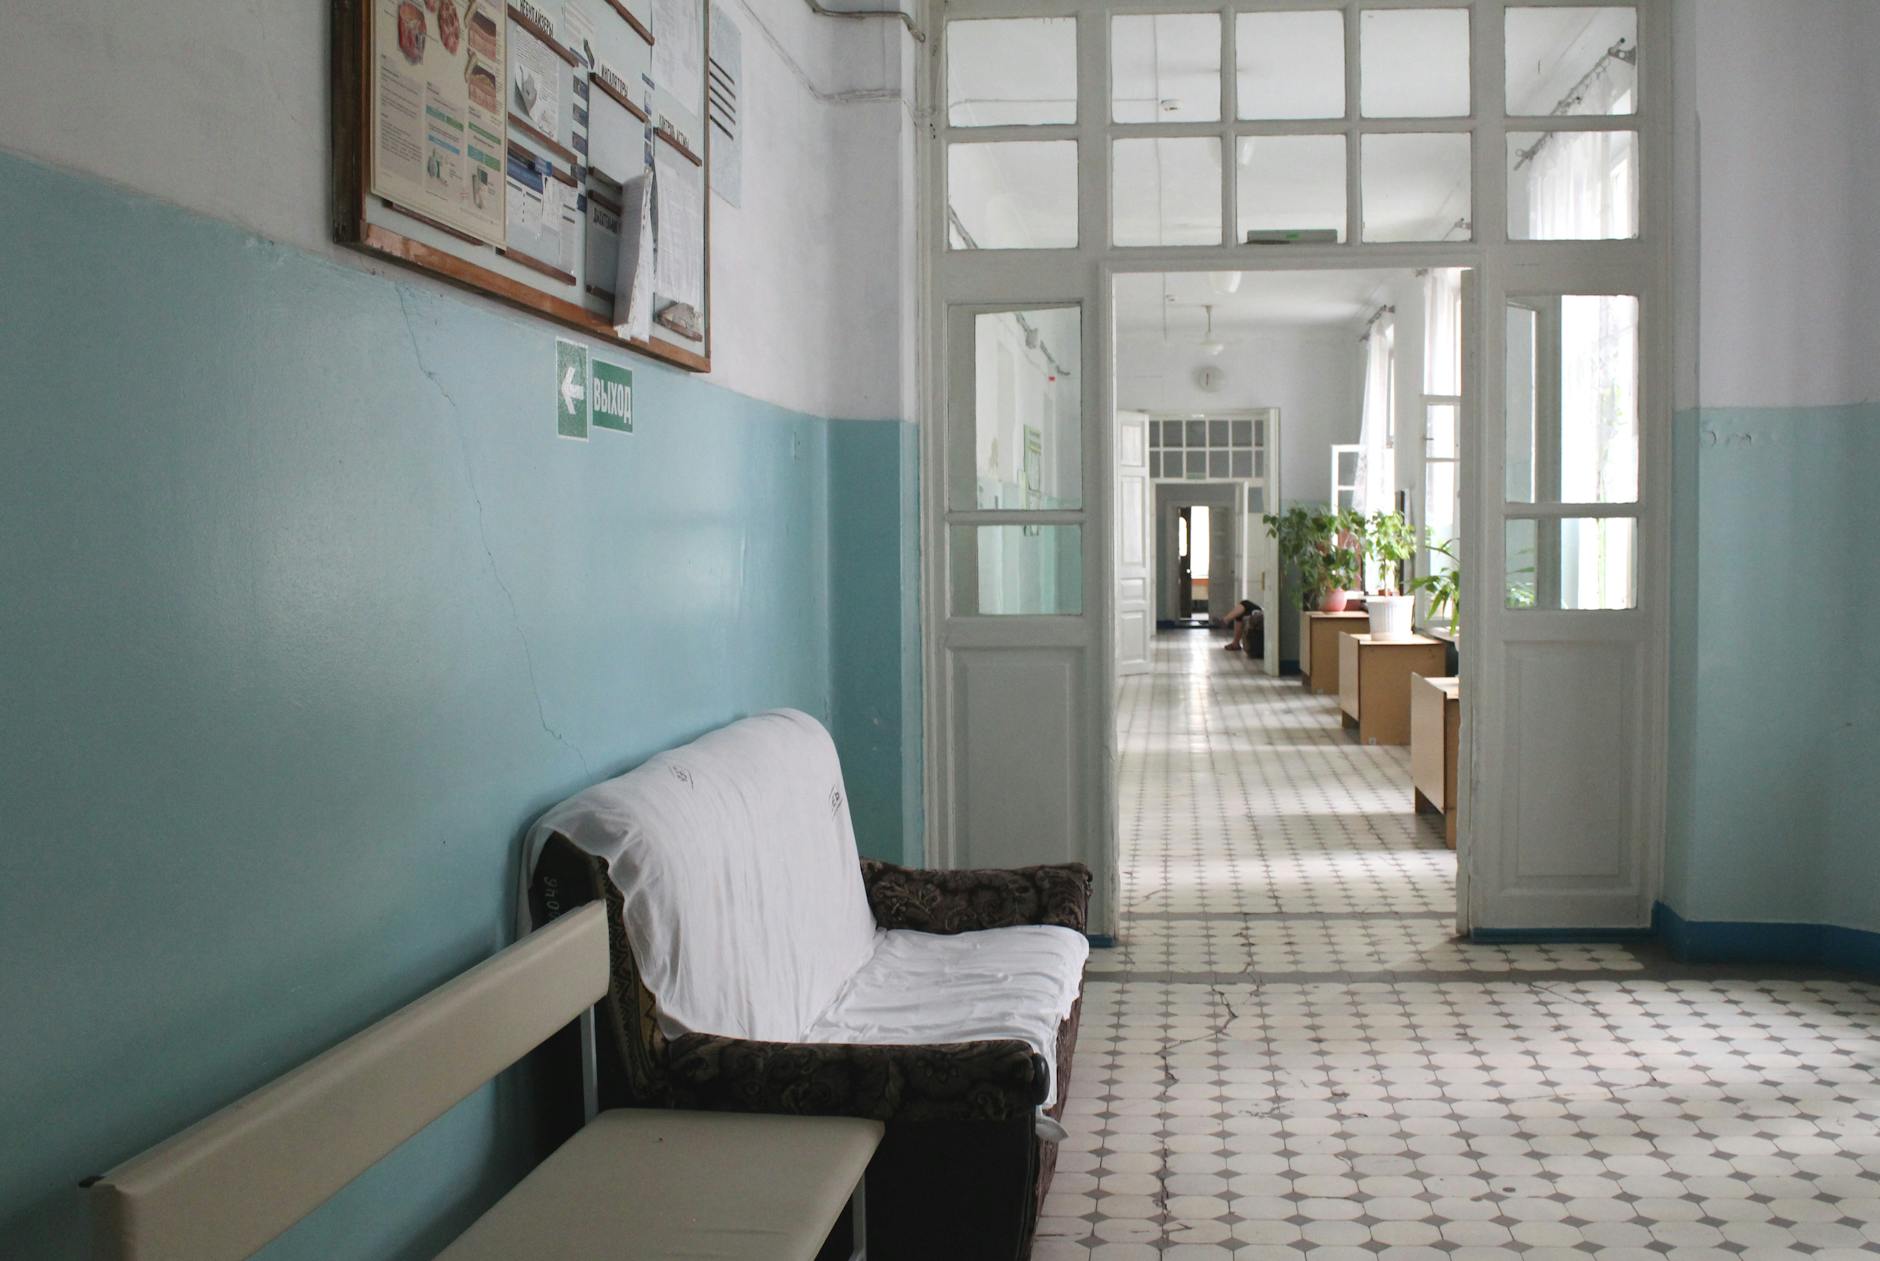 view of a hallway in an old hospital